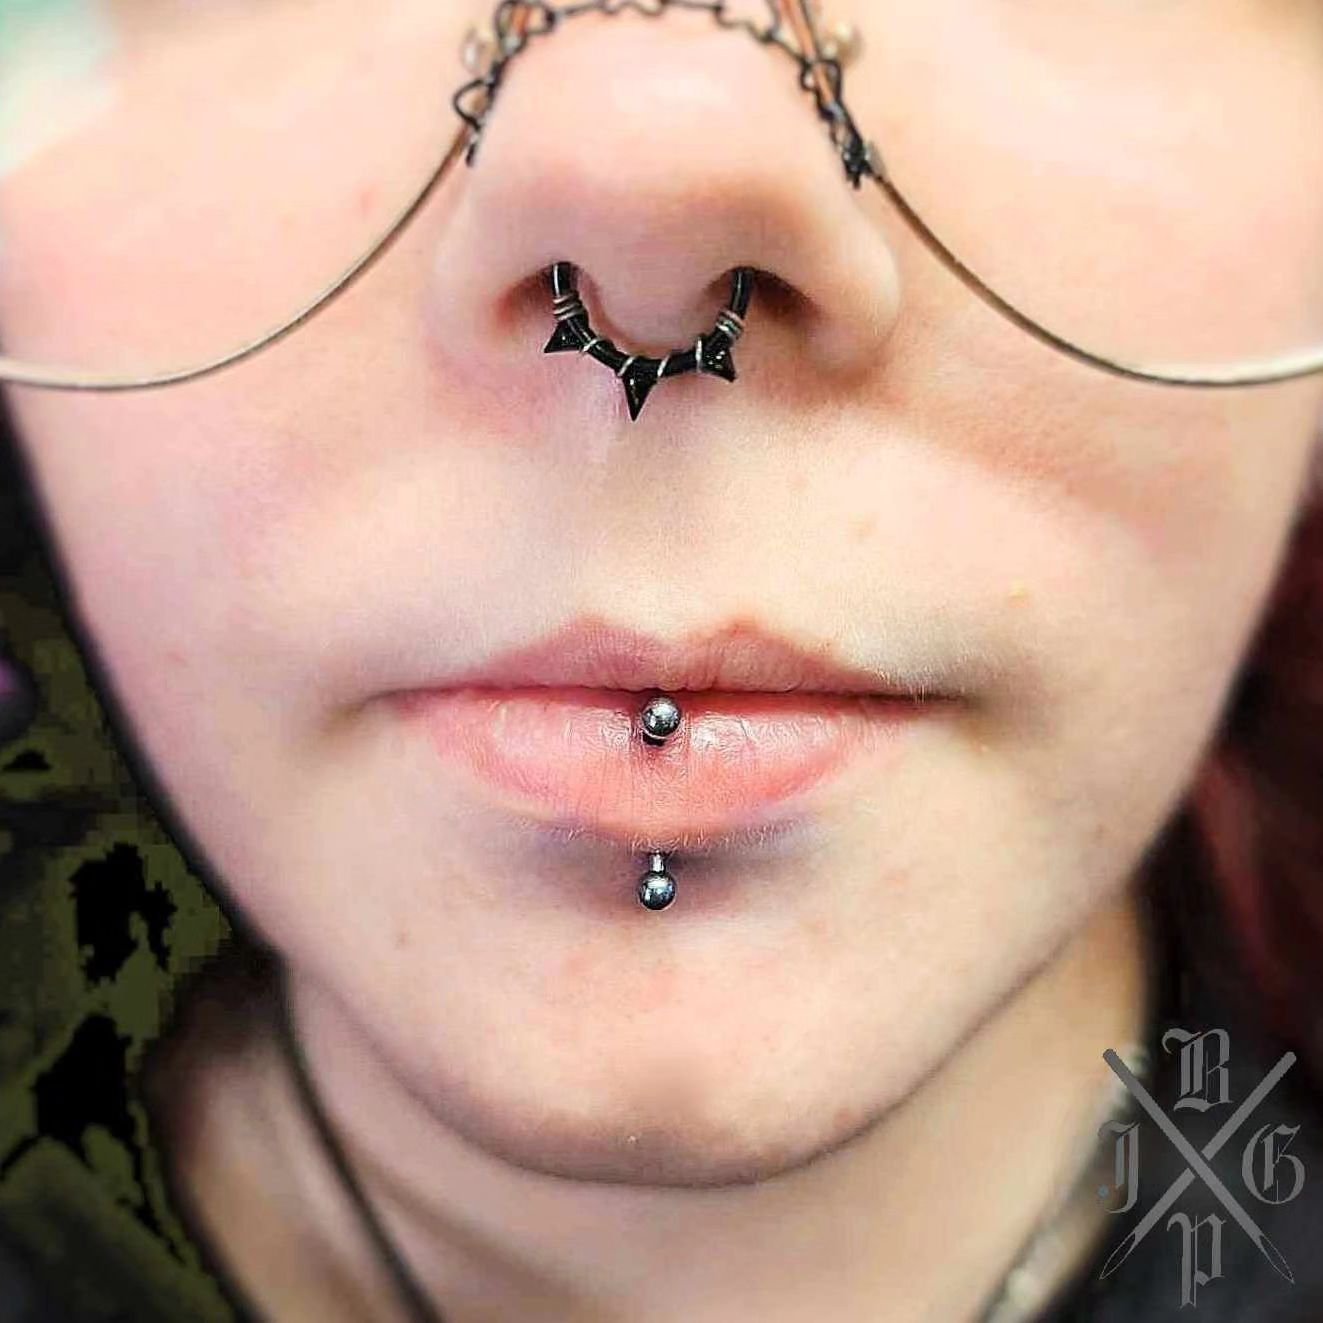 Vertical Labret by Jack @piercings.jpg 
Piercings are available on a walk in basis Tuesday-Saturday 12-7 
Thanks for looking!

#piercings #piercer #labret #verticallabret #cincinnatitattoo #cincinnatipiercer #professionalpiercer #implantgrade #implan